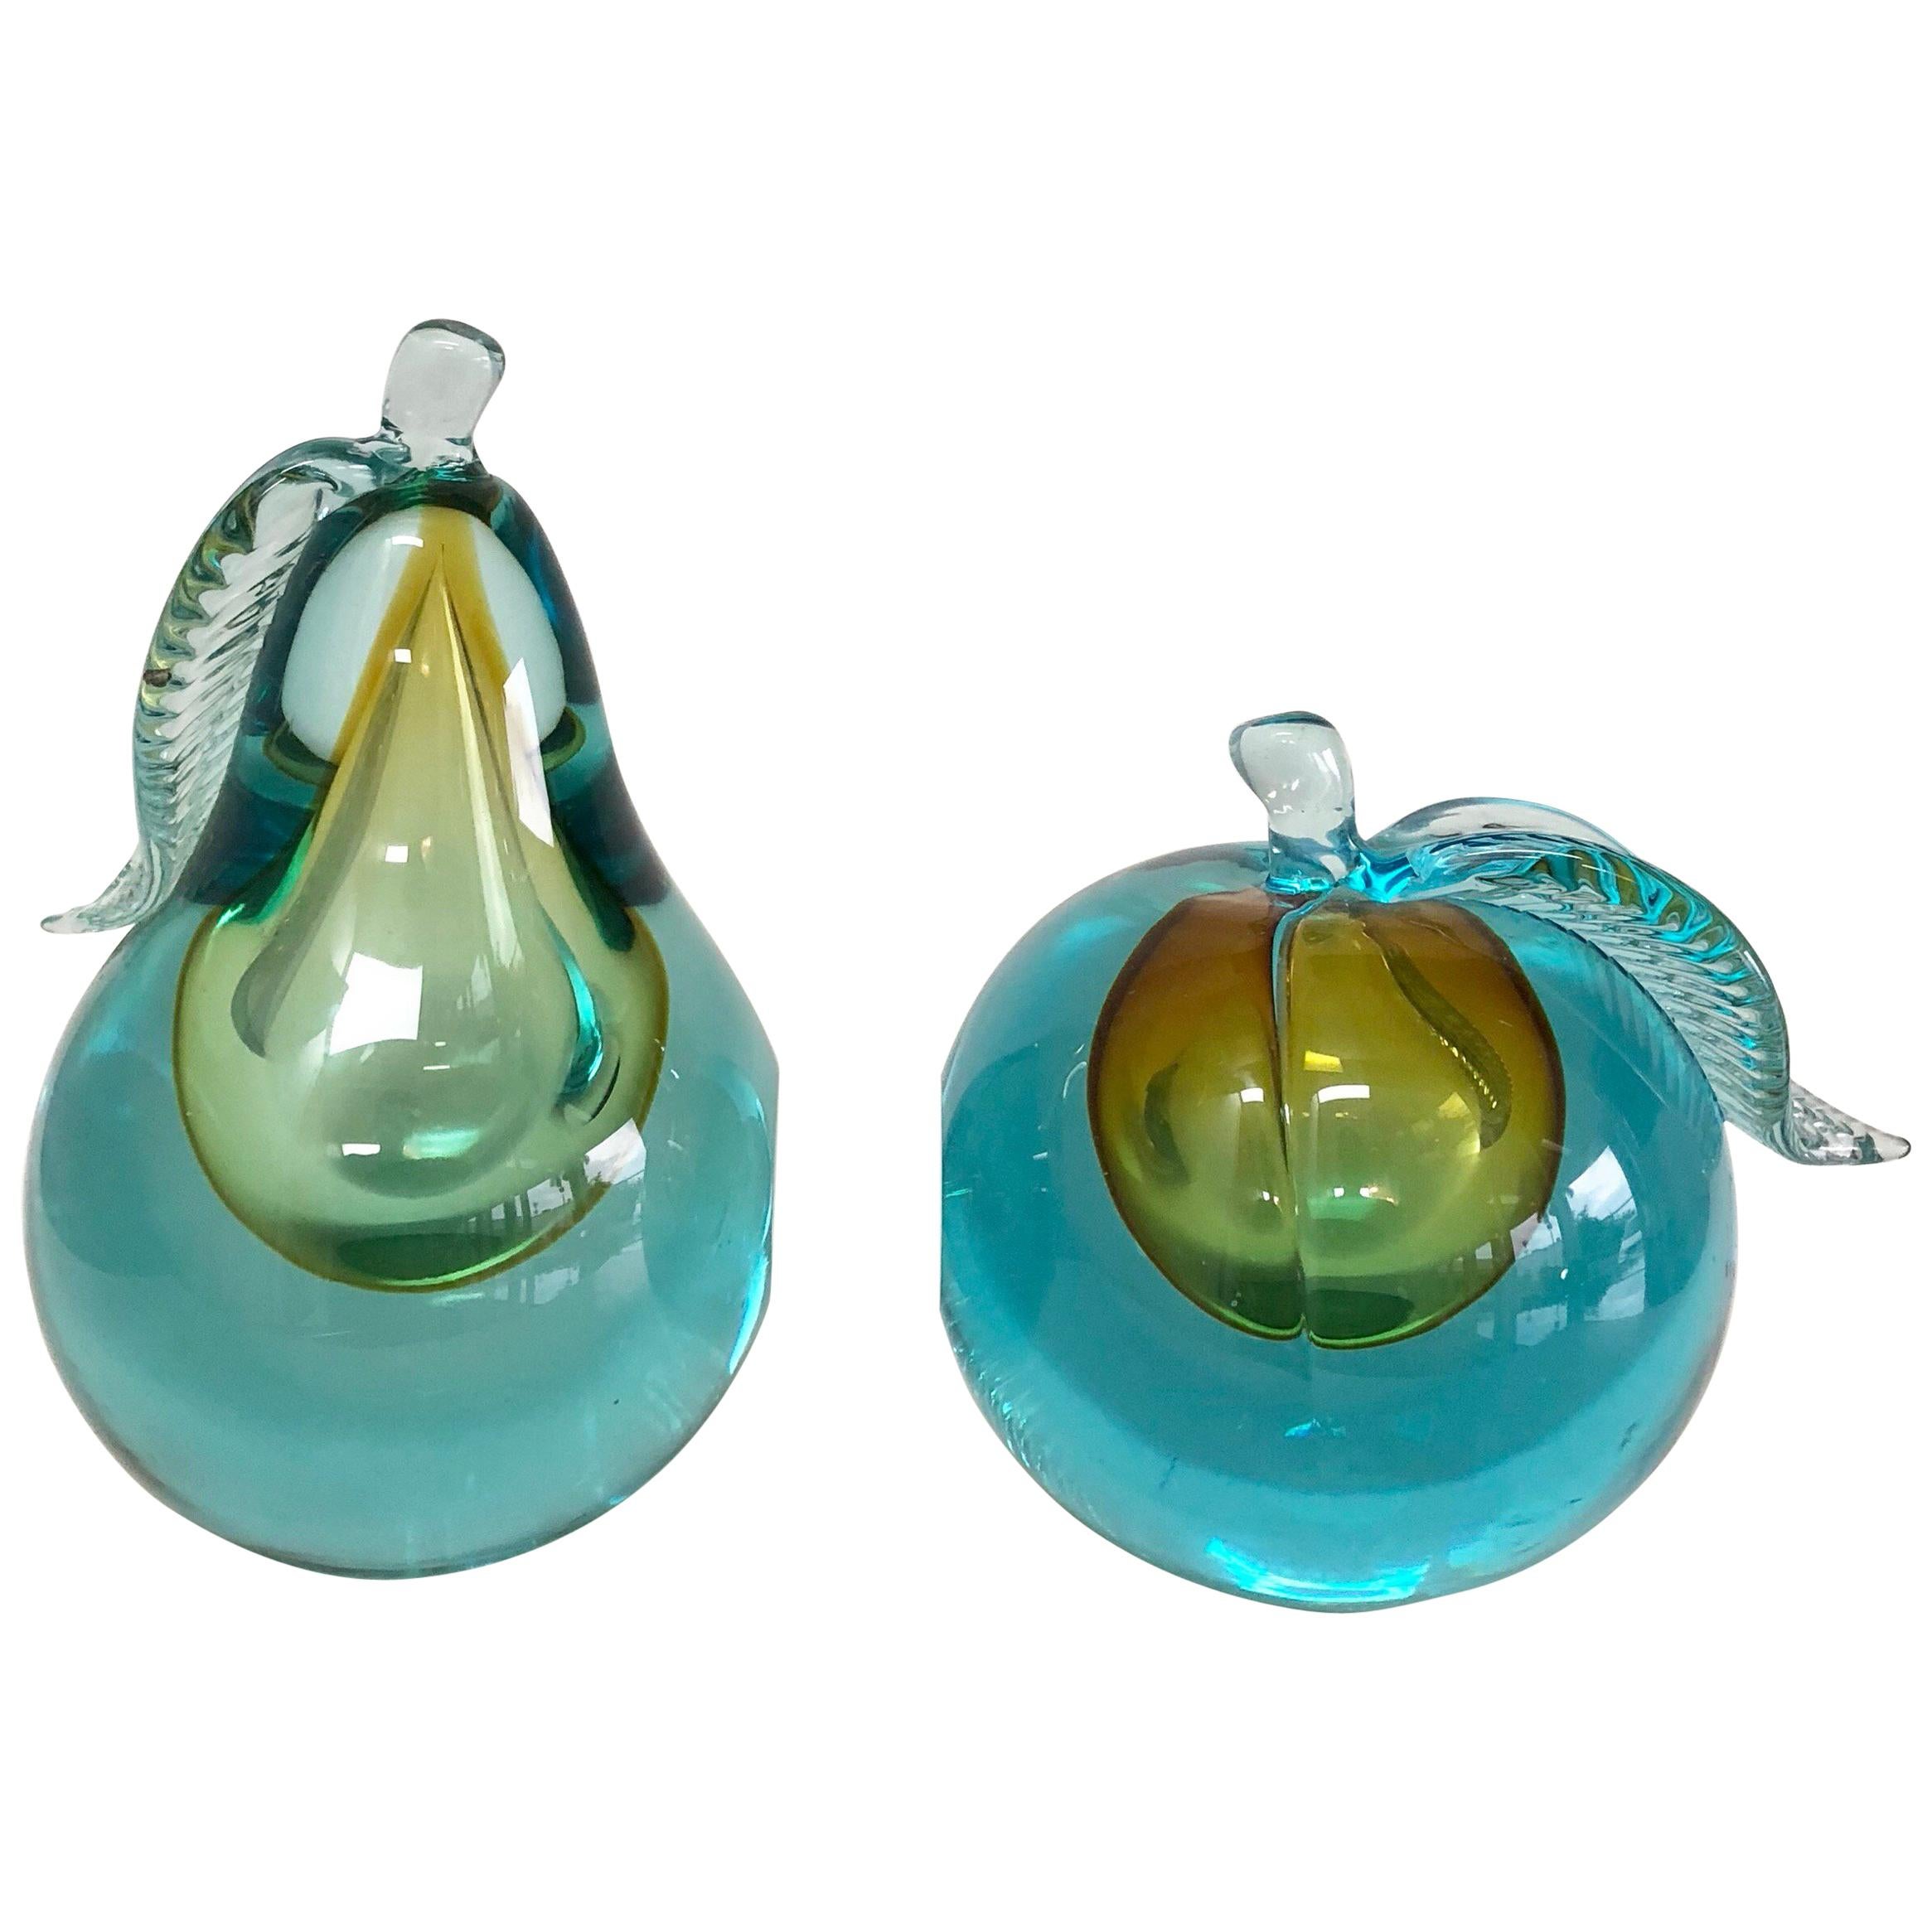 Murano Art Glass Sommerso Apple and Pear Bookends Sculptures